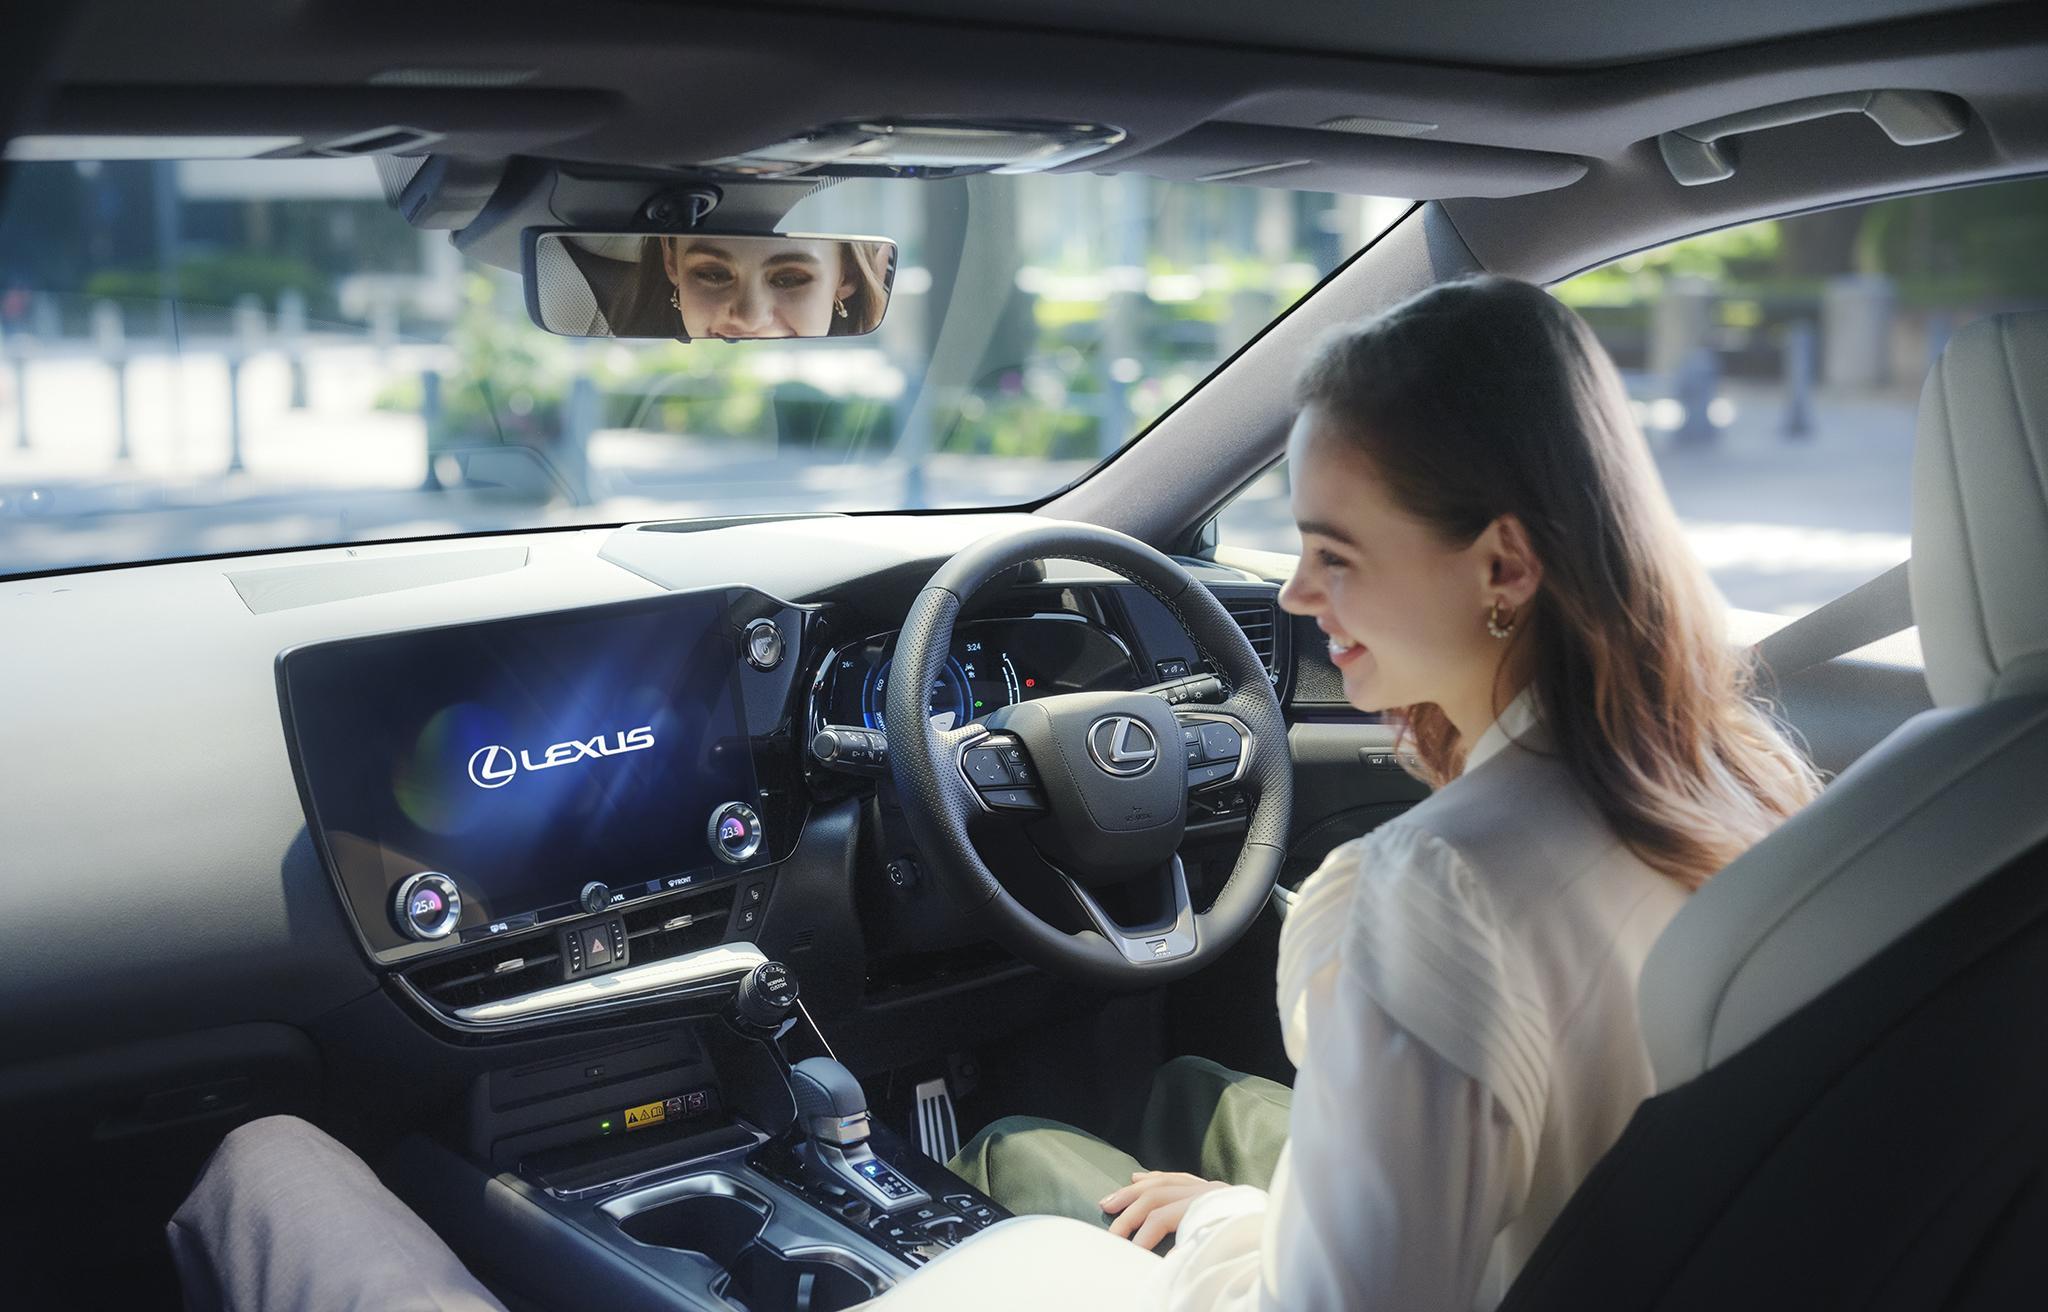 More information about "Lexus Connected Services expands with launch of new Connected App"